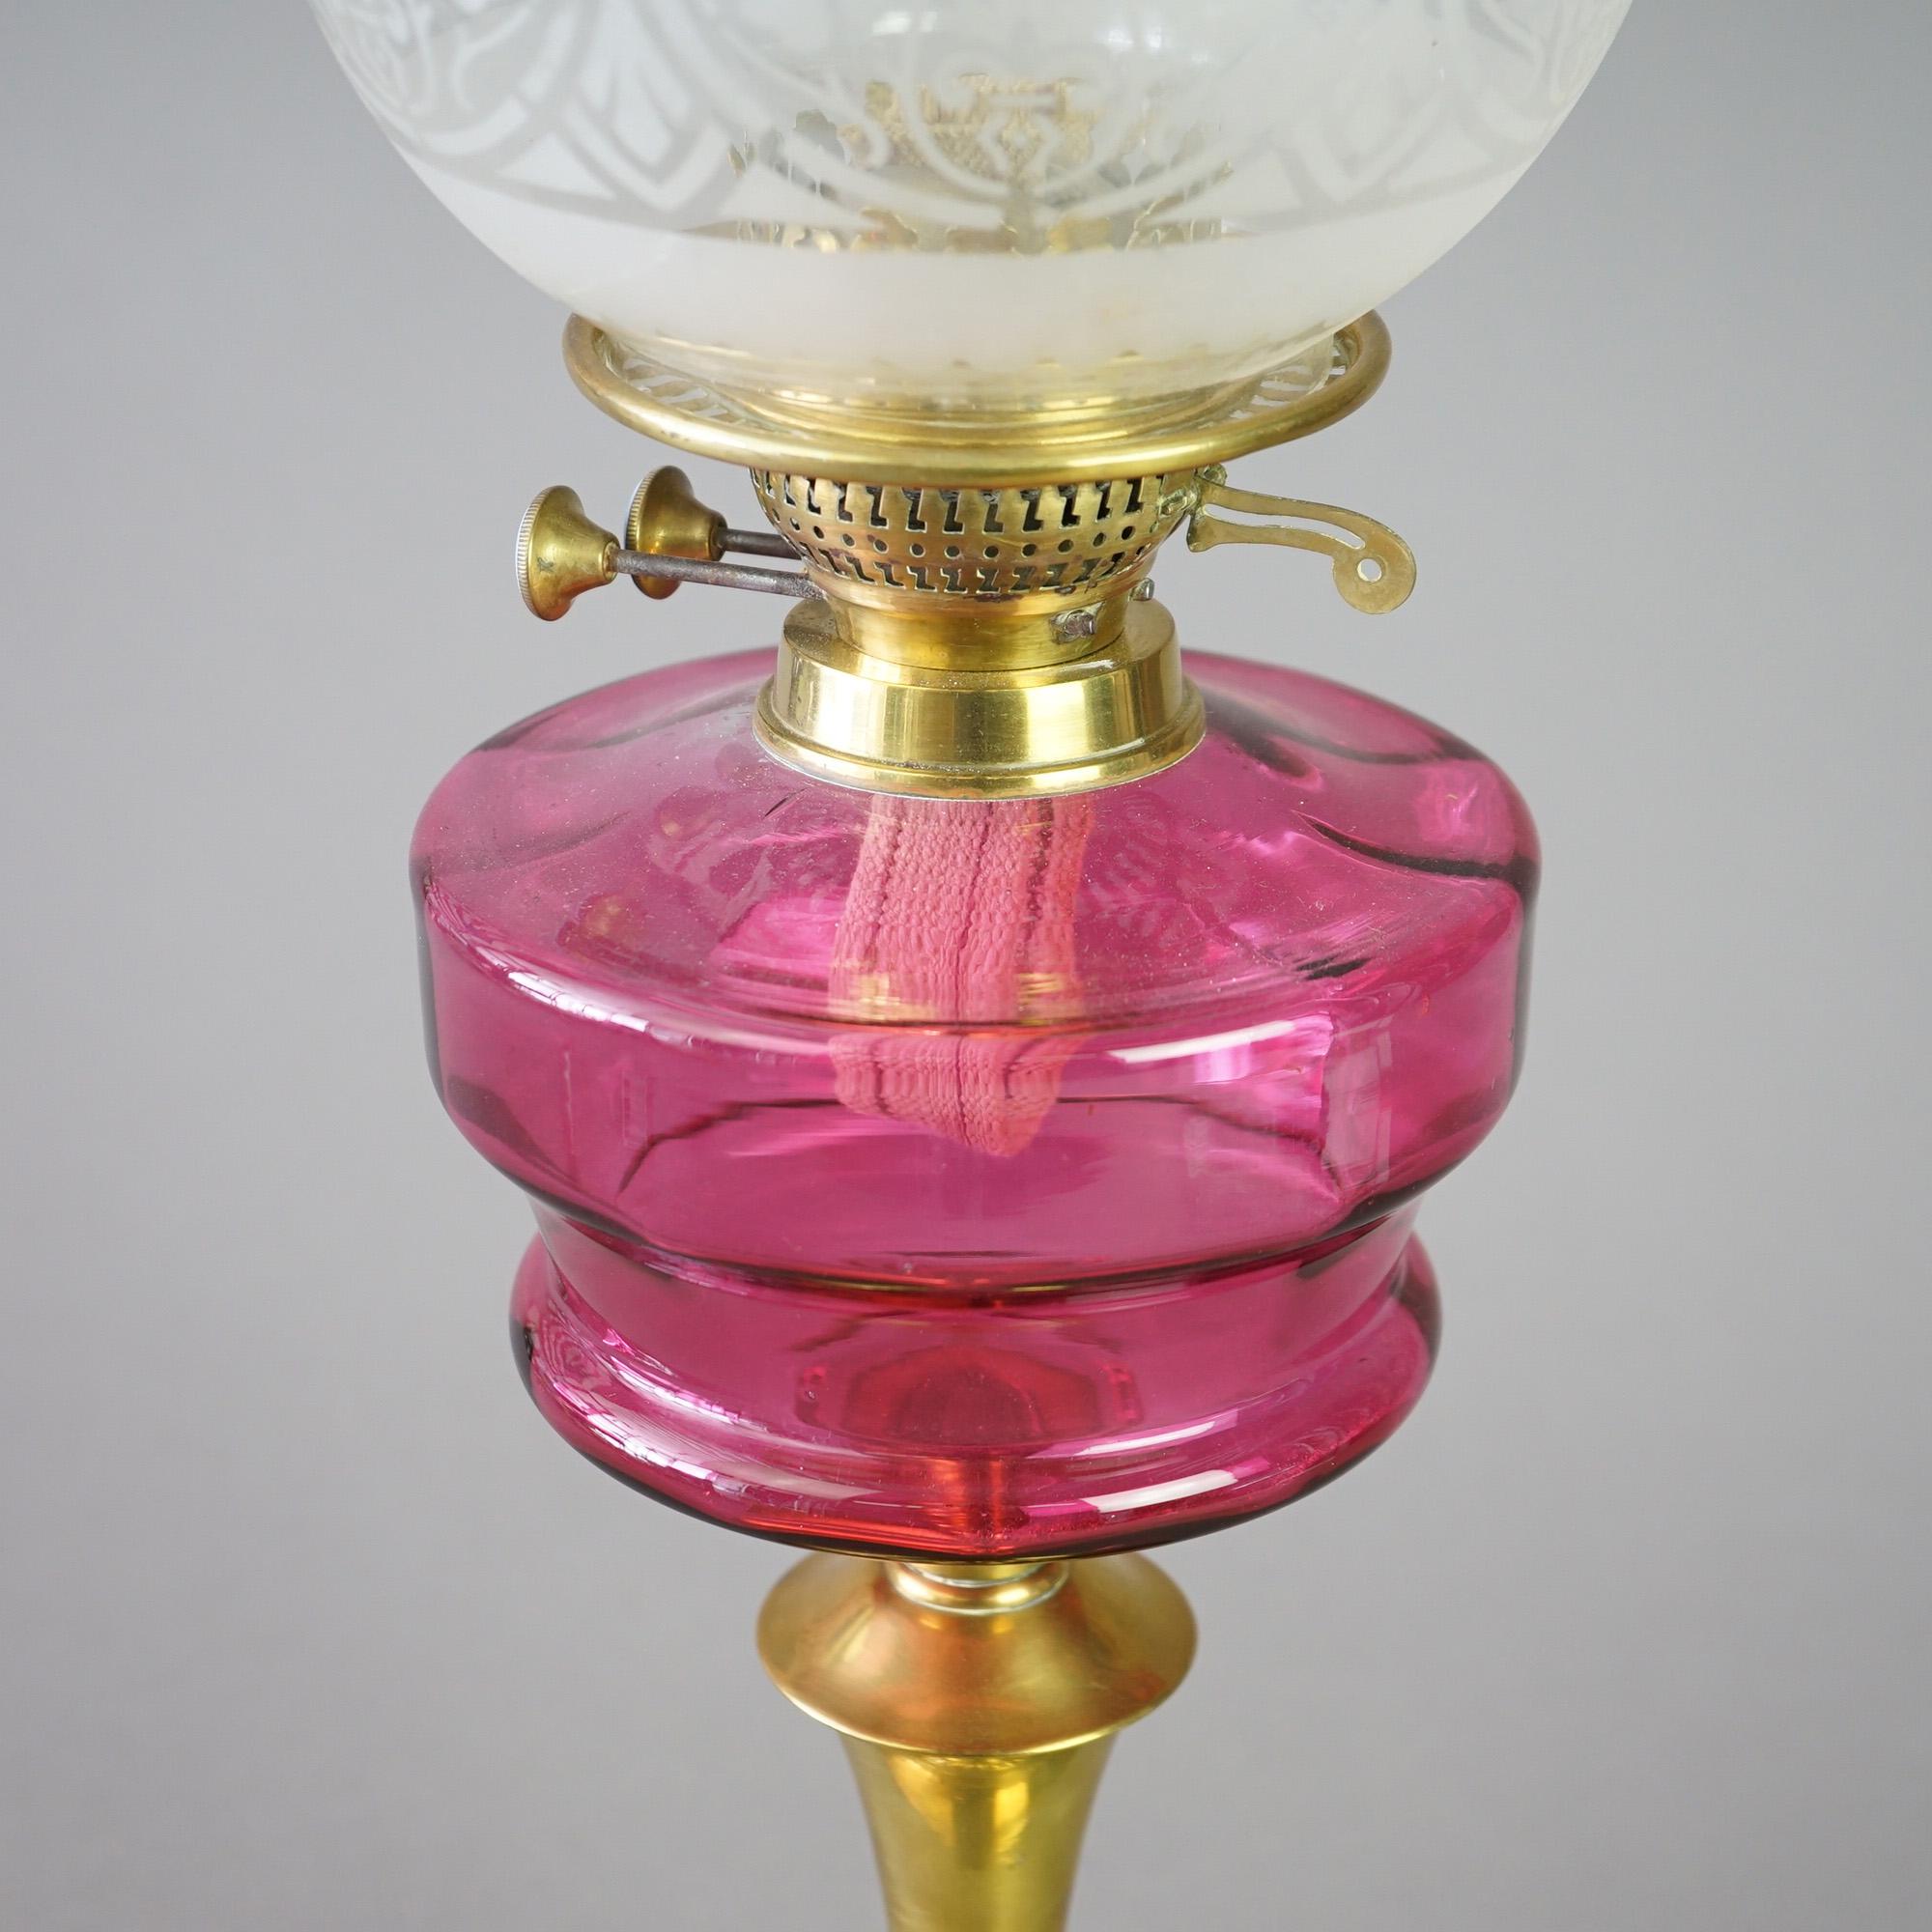 Antique Brass &Cranberry Glass “Gone With The Wind” Oil Lamp C1890 For Sale 3